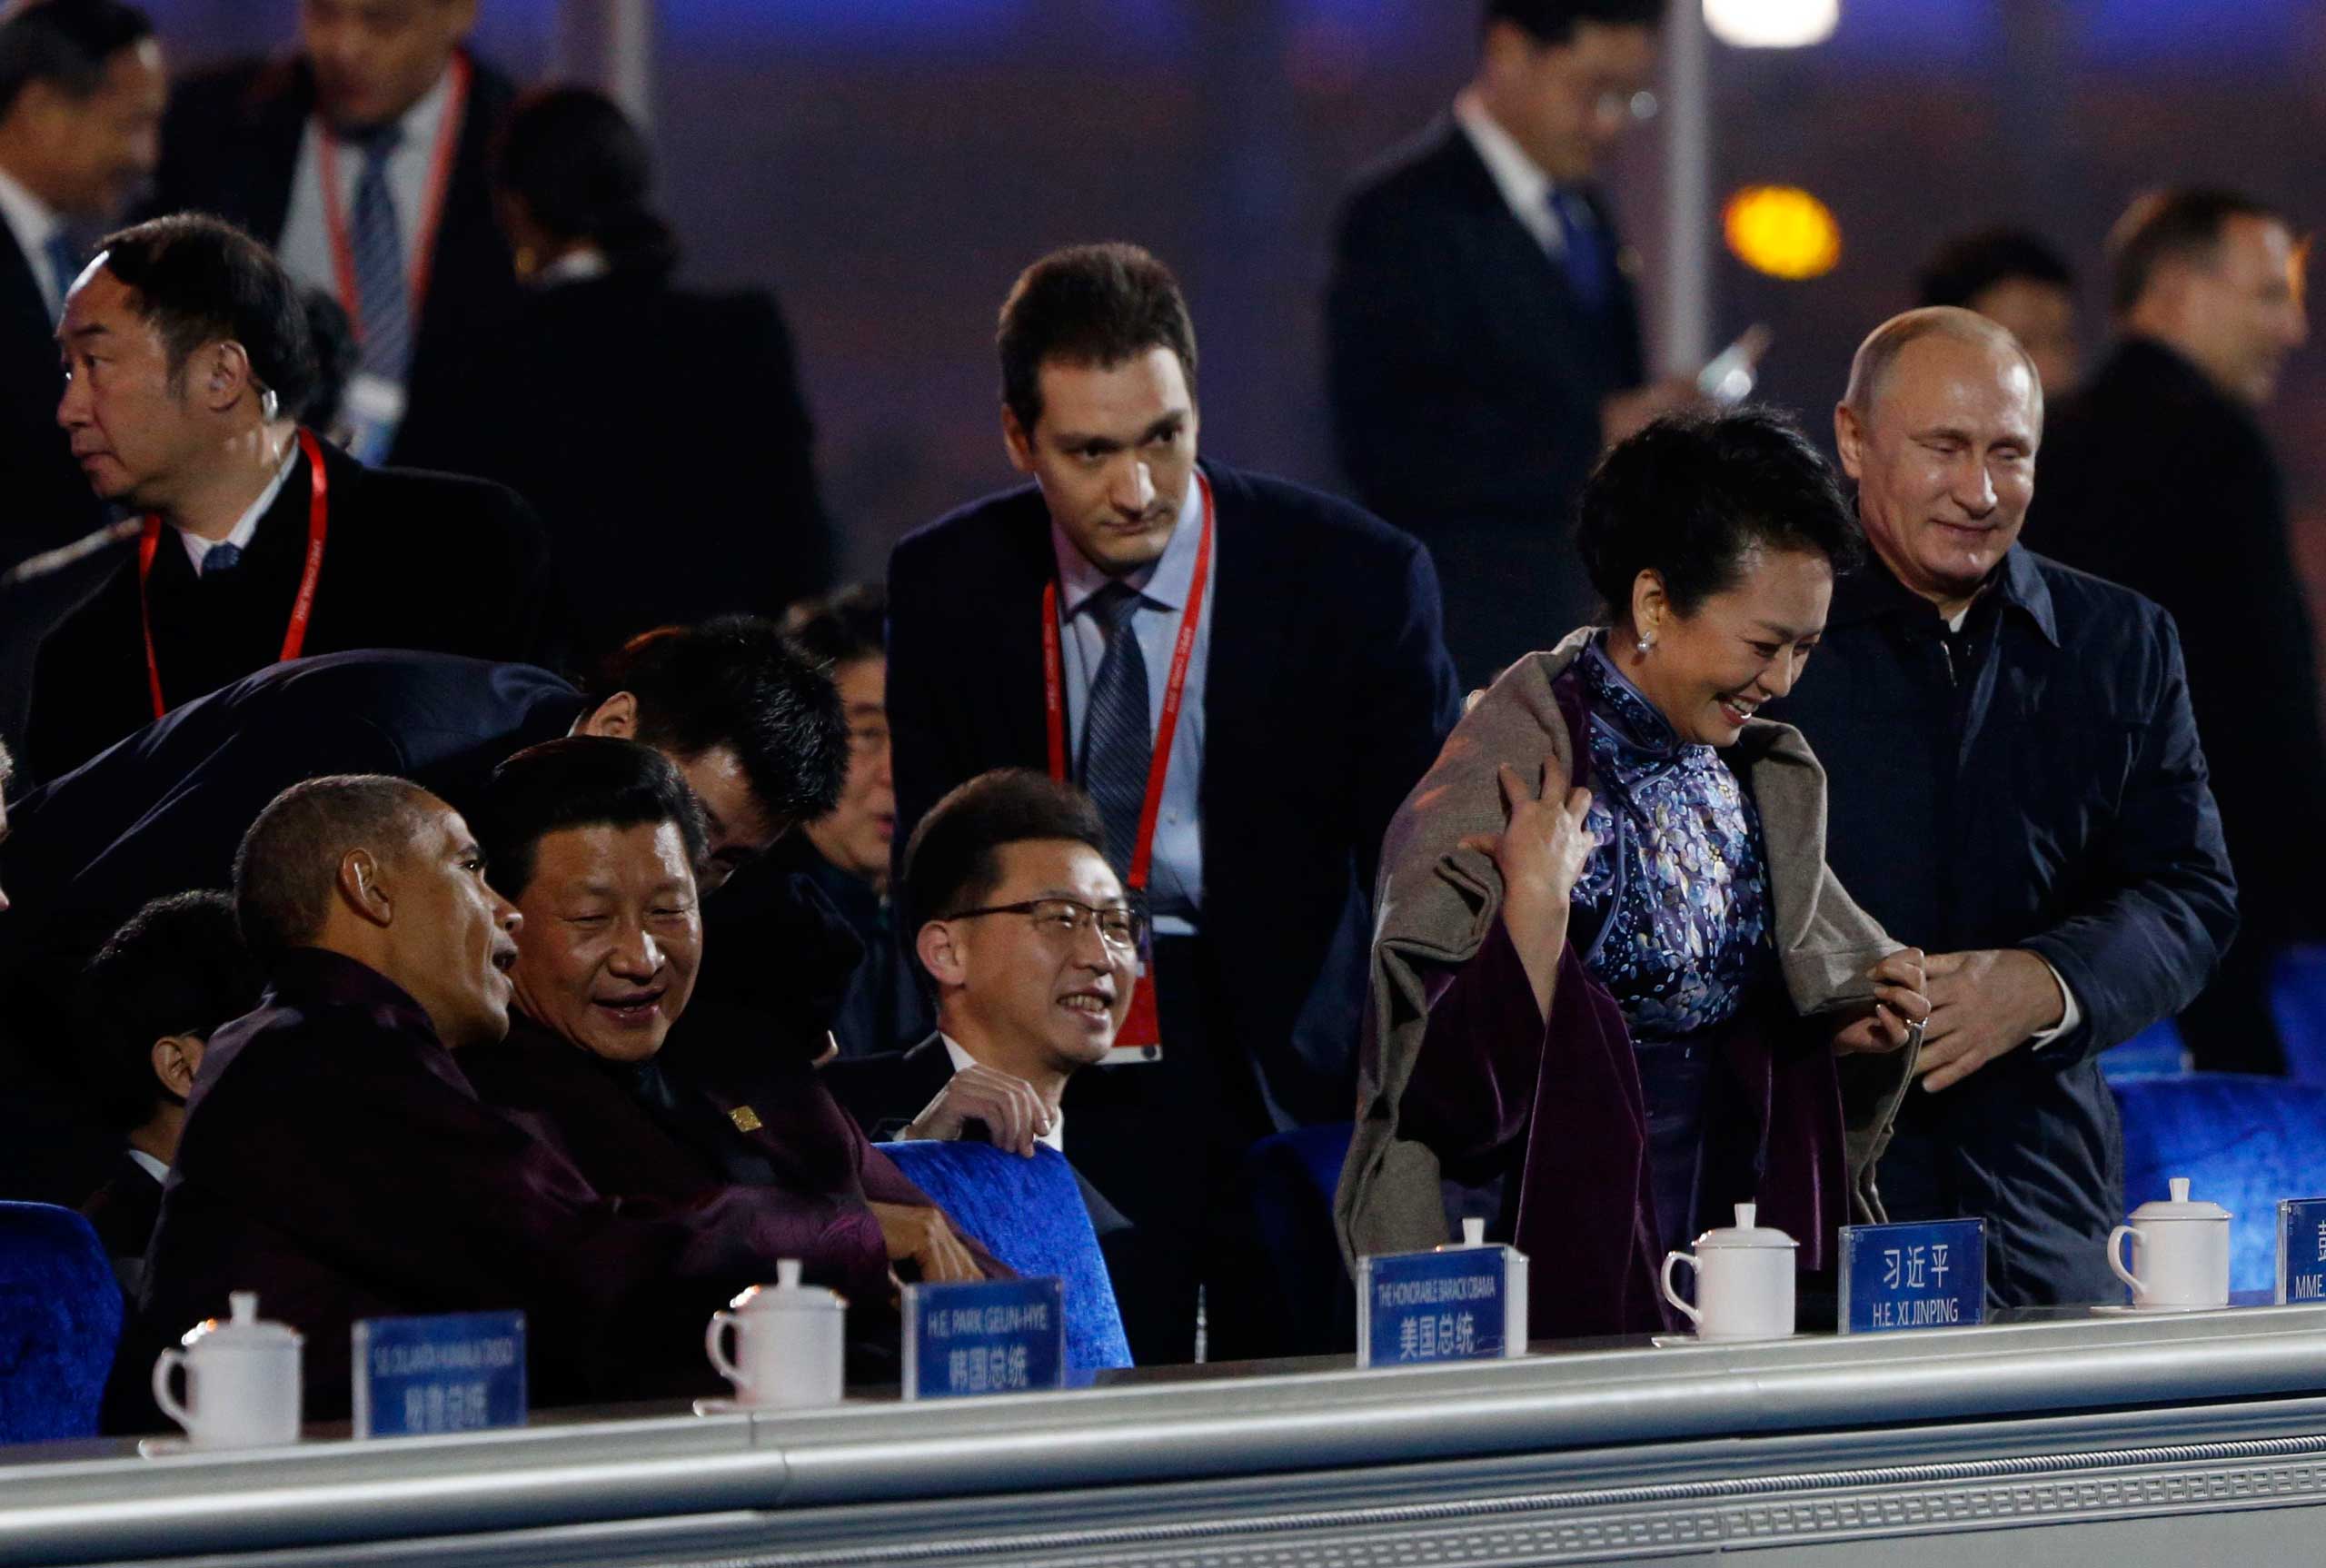 Nov. 10, 2014. Russia's President Vladimir Putin helps put a blanket on Peng Liyuan (second right), wife of China's President Xi Jinping (second left), as Xi talks to President Barack Obama during a lights and fireworks show to celebrate Asia-Pacific Economic Cooperation (APEC) Leaders' Meeting at National Aquatics Center, or Water Cube, in Beijing.